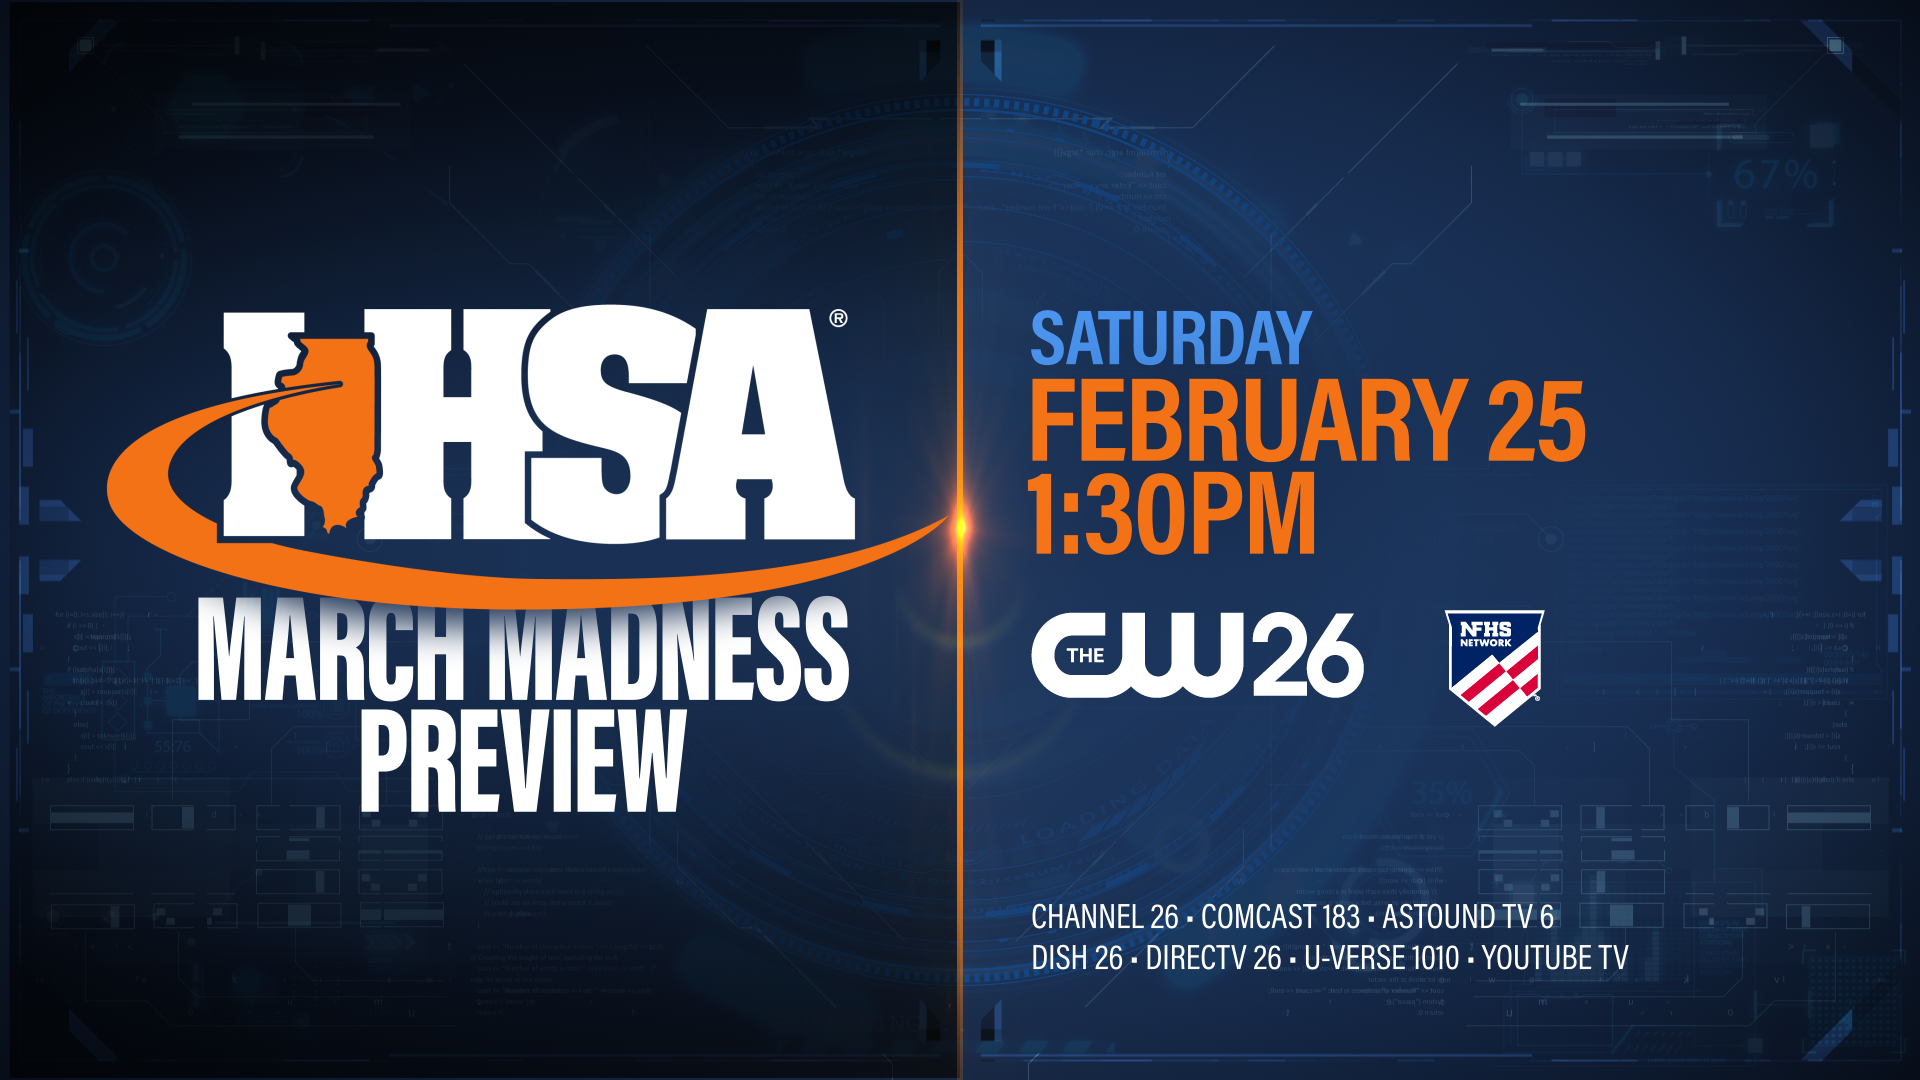 CW26 Get Amped up with Our IHSA March Madness Preview